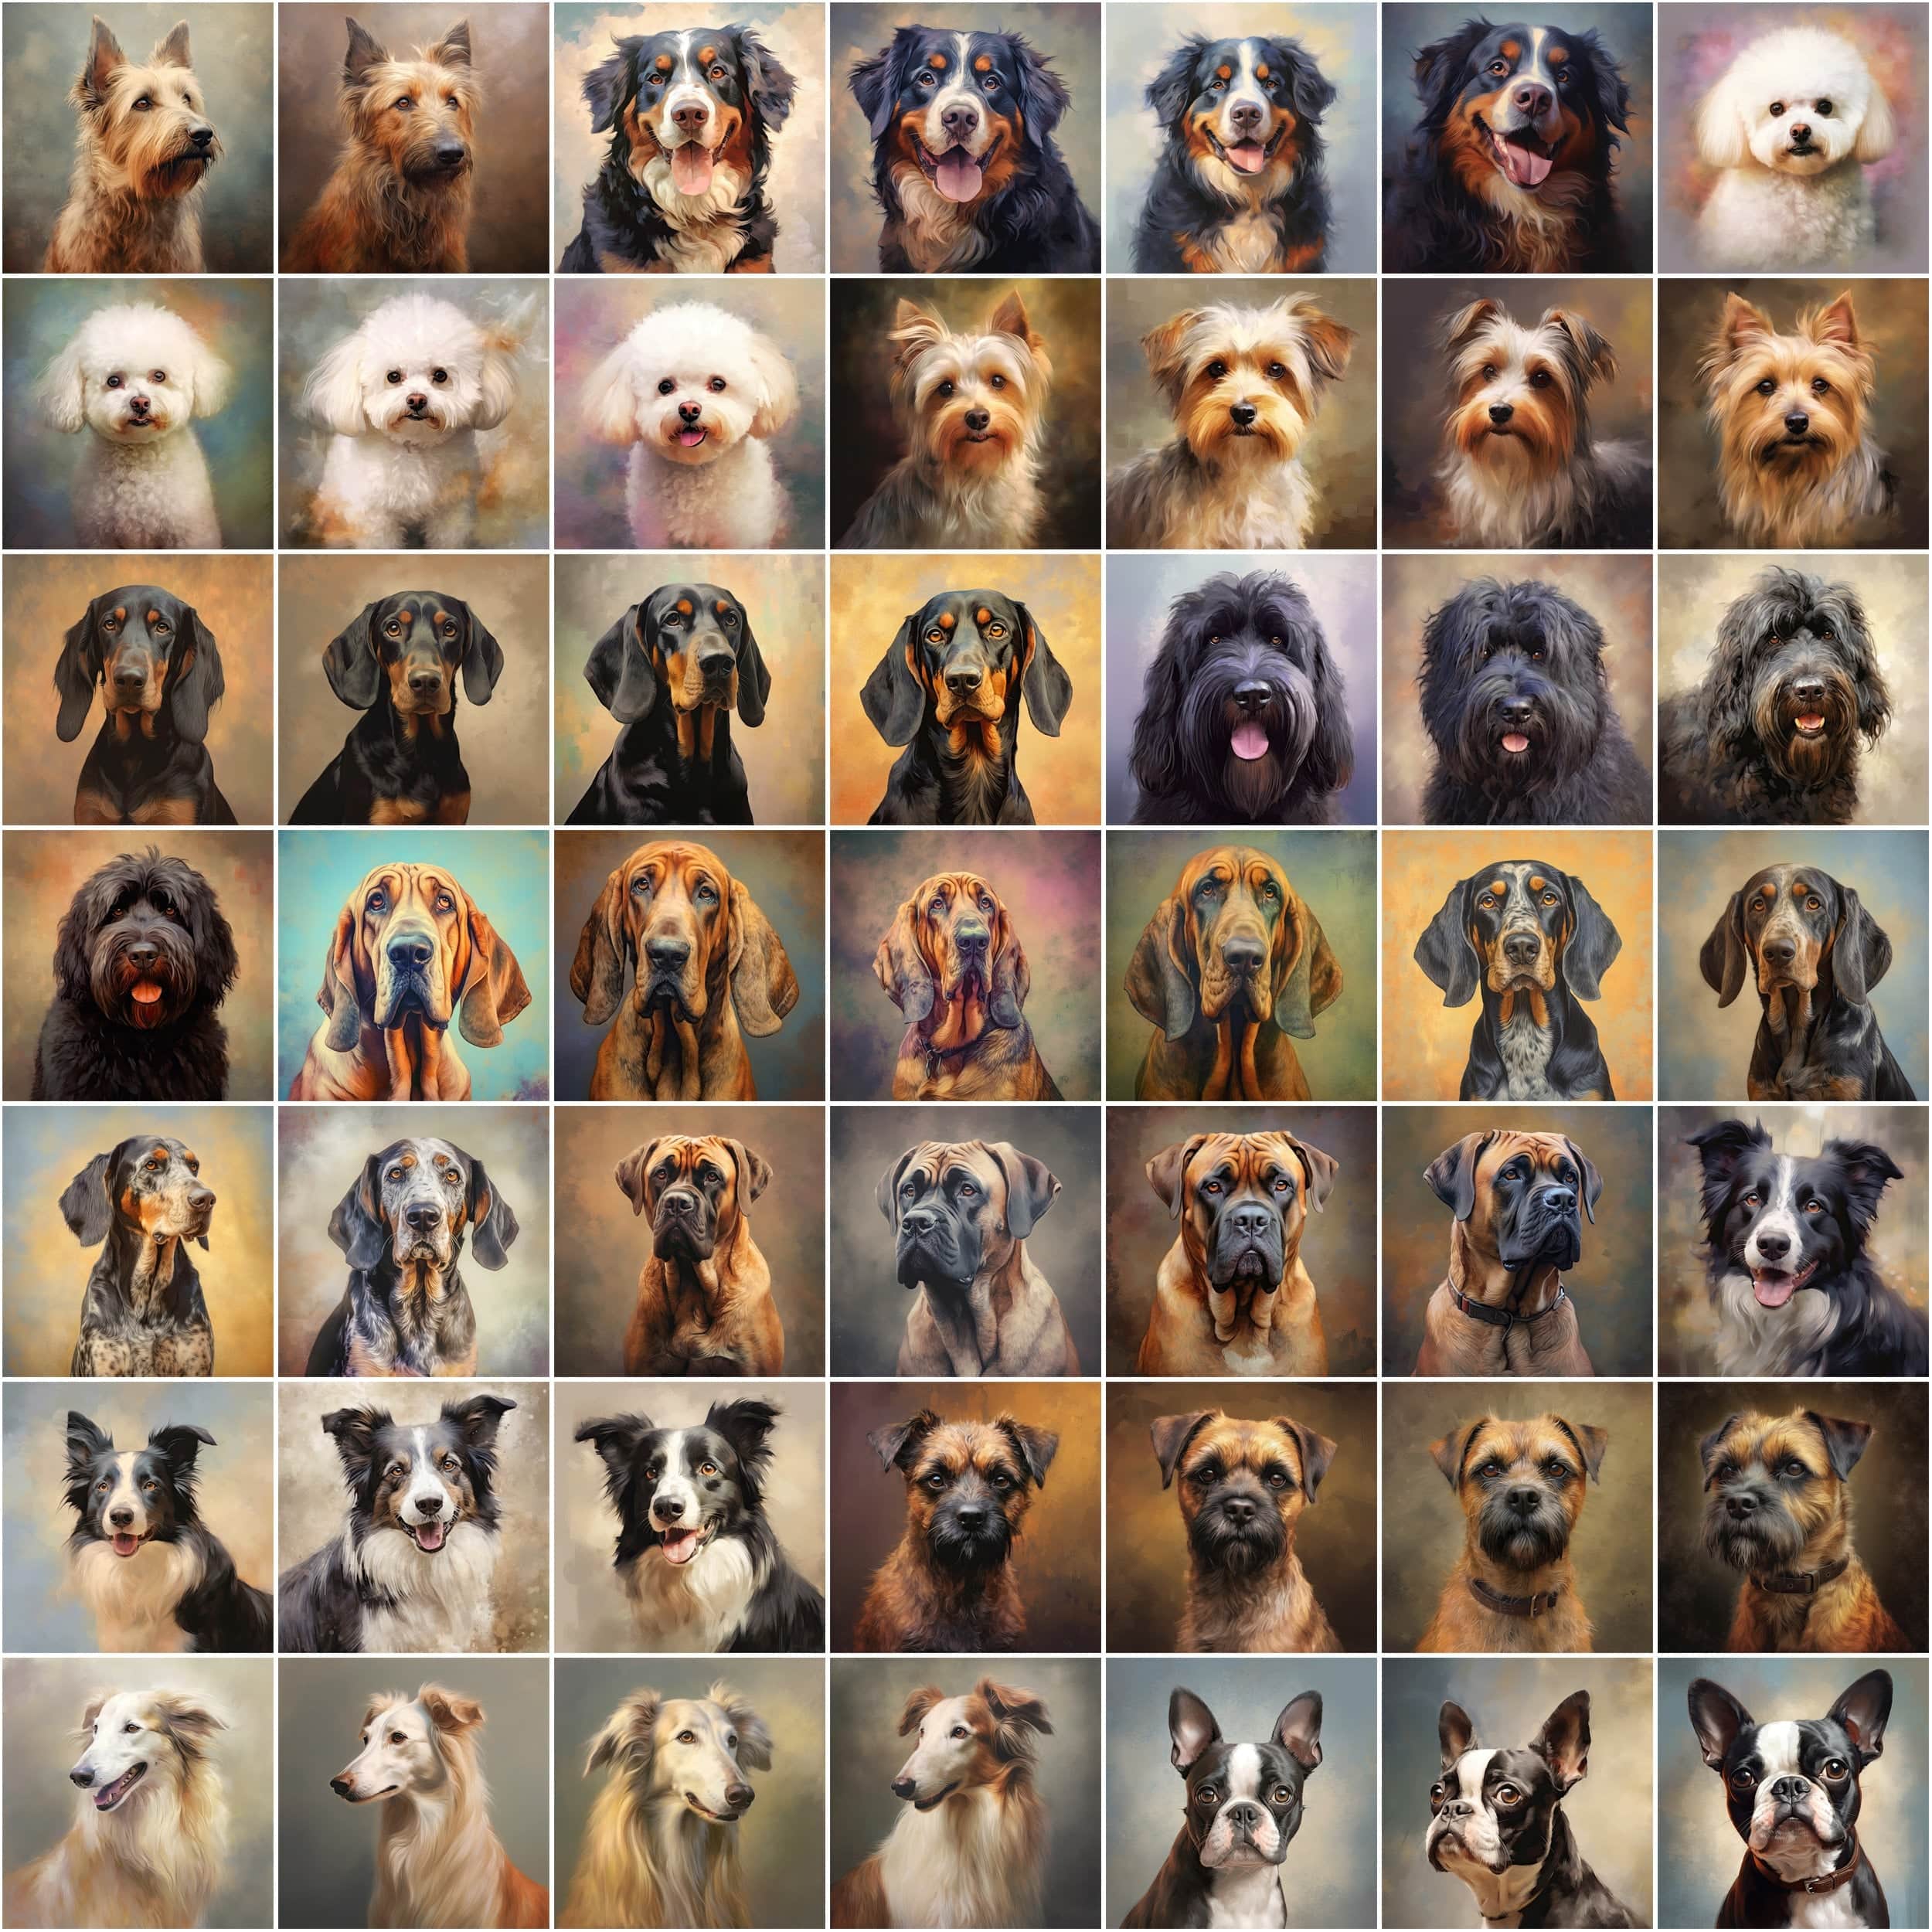 760 Oil Painting Dog Breed Images | Commercial License Included | High Resolution PNGs | Instant Download | Perfect for Pet Lovers Digital Download Sumobundle